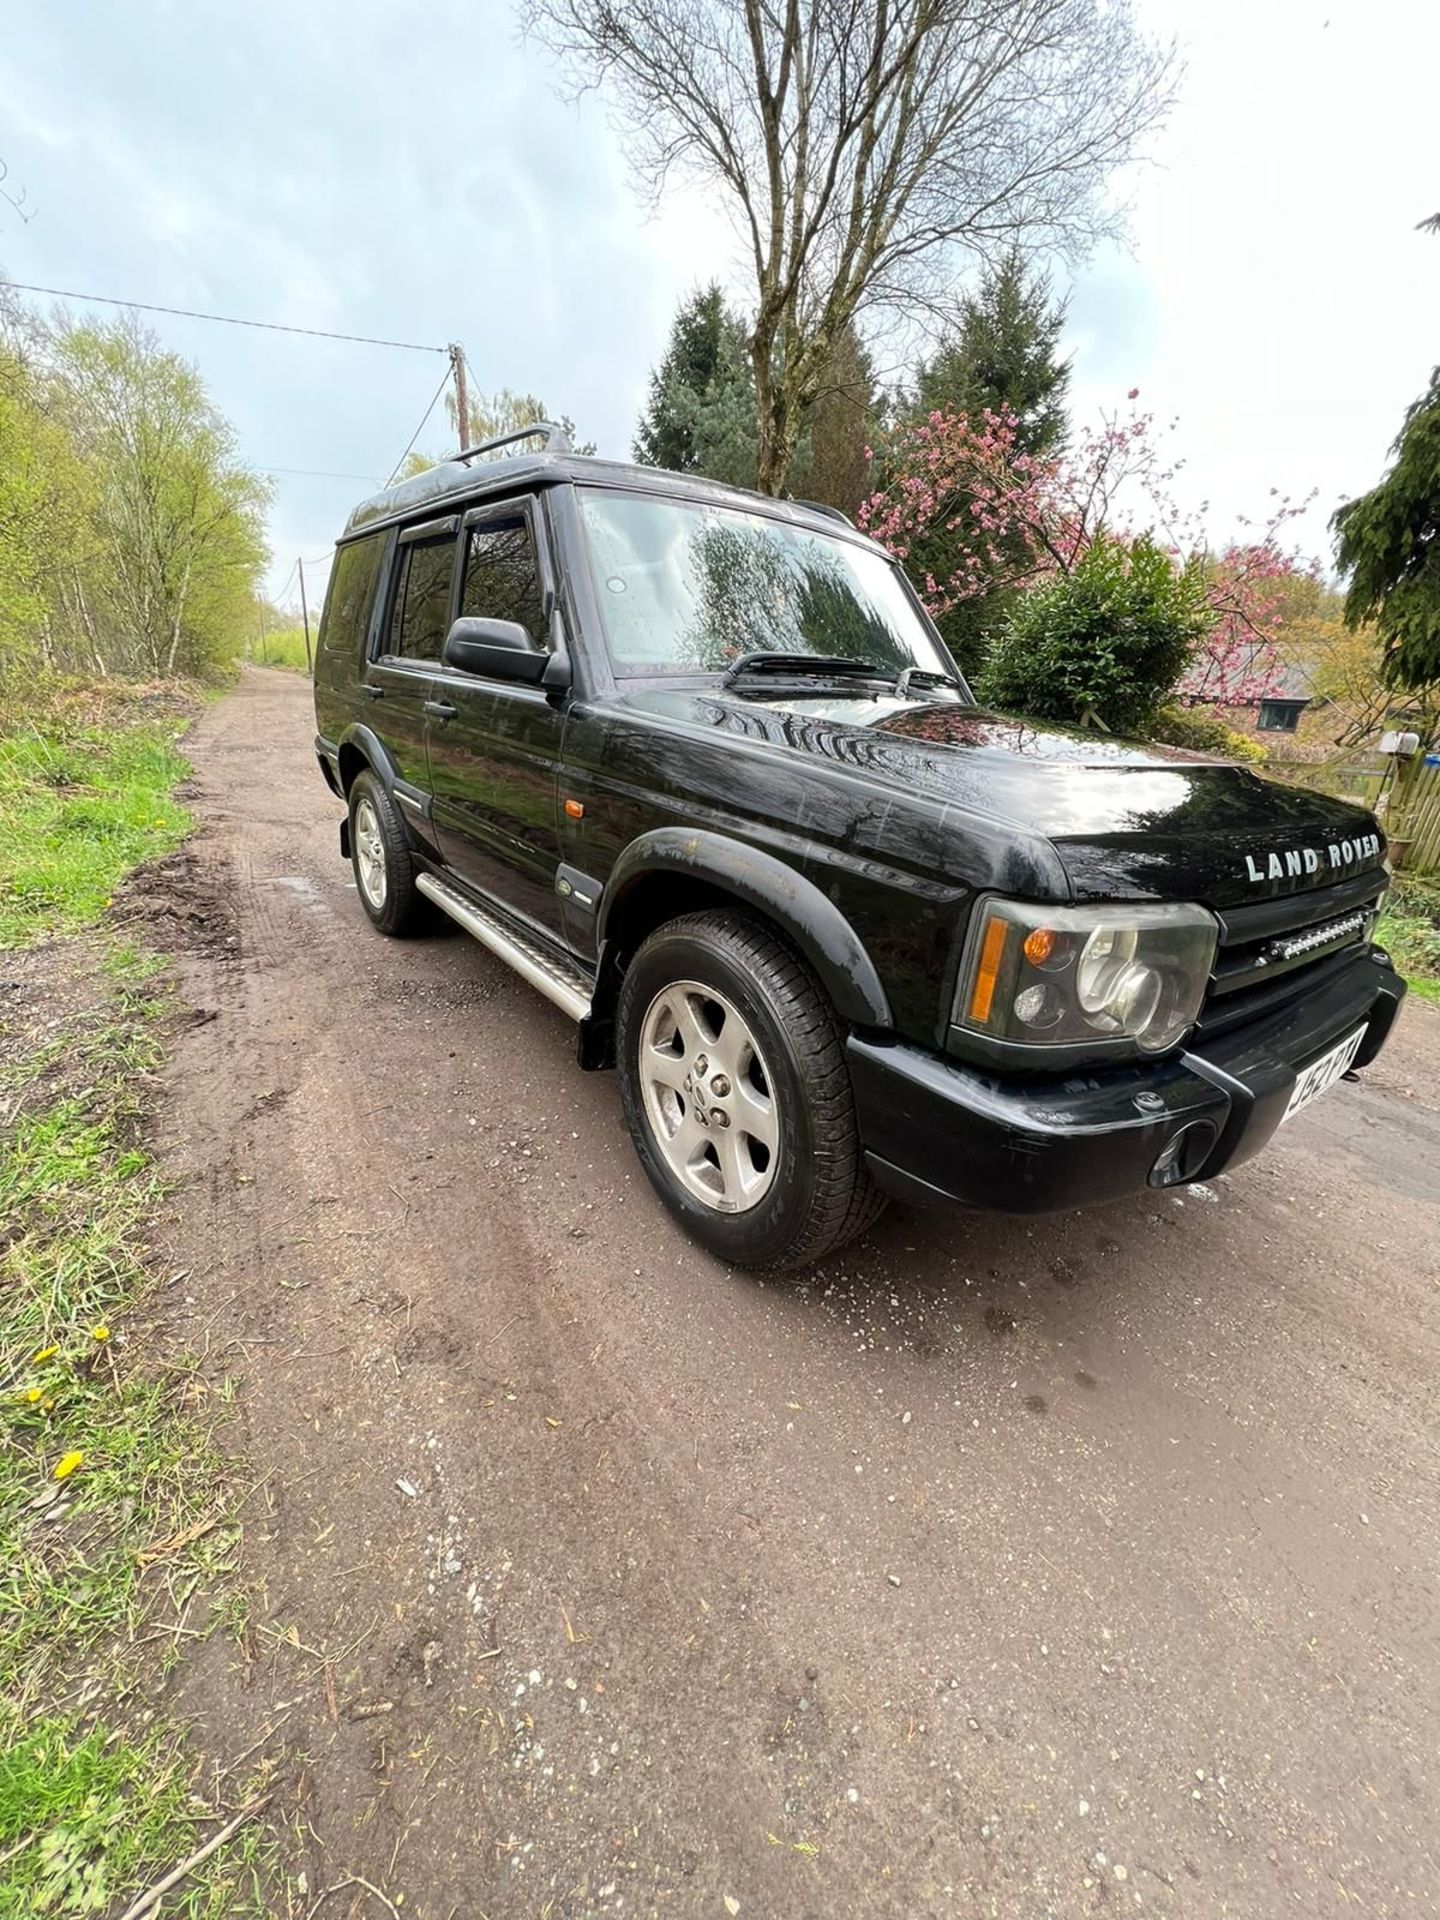 2002 52 PLATE LAND ROVER DISCOVERY 2 SUV ESTATE - TD5 - TOP OF THE RANGE - HALF LEATHER SEATS